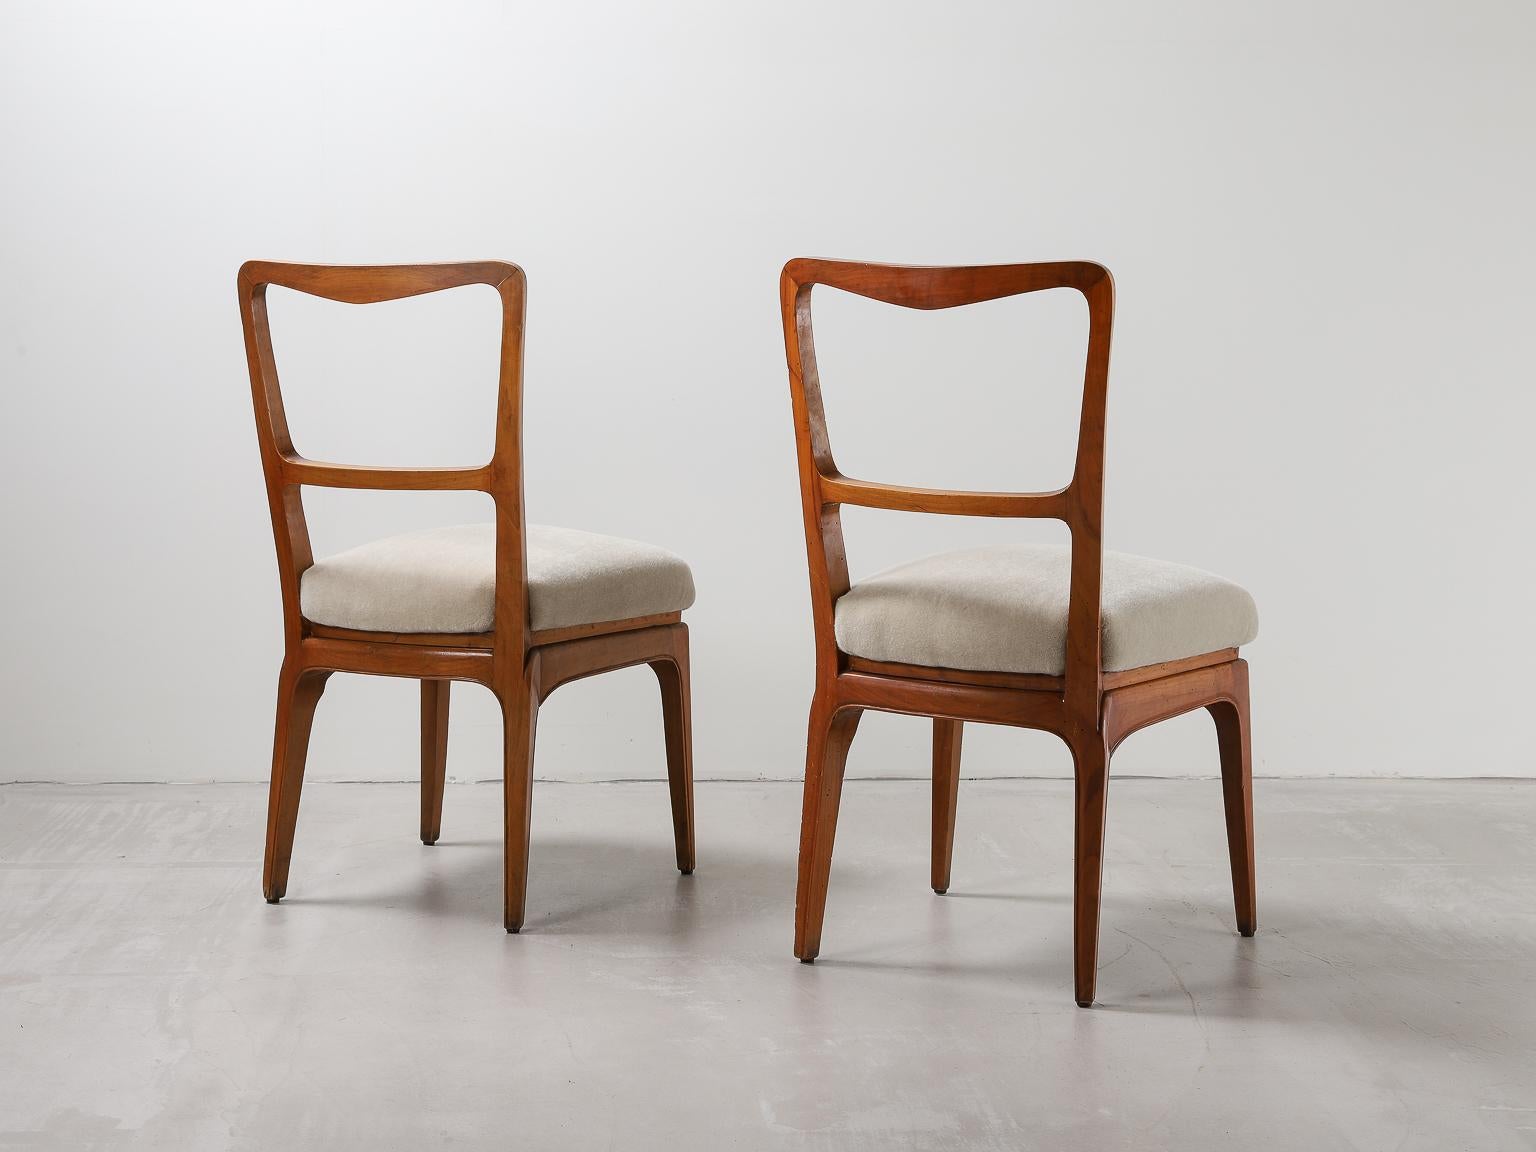 Italian Pair of Cherry Wood & Fabric Chairs by  Paolo Buffa in Bespoke Mohair Velvet